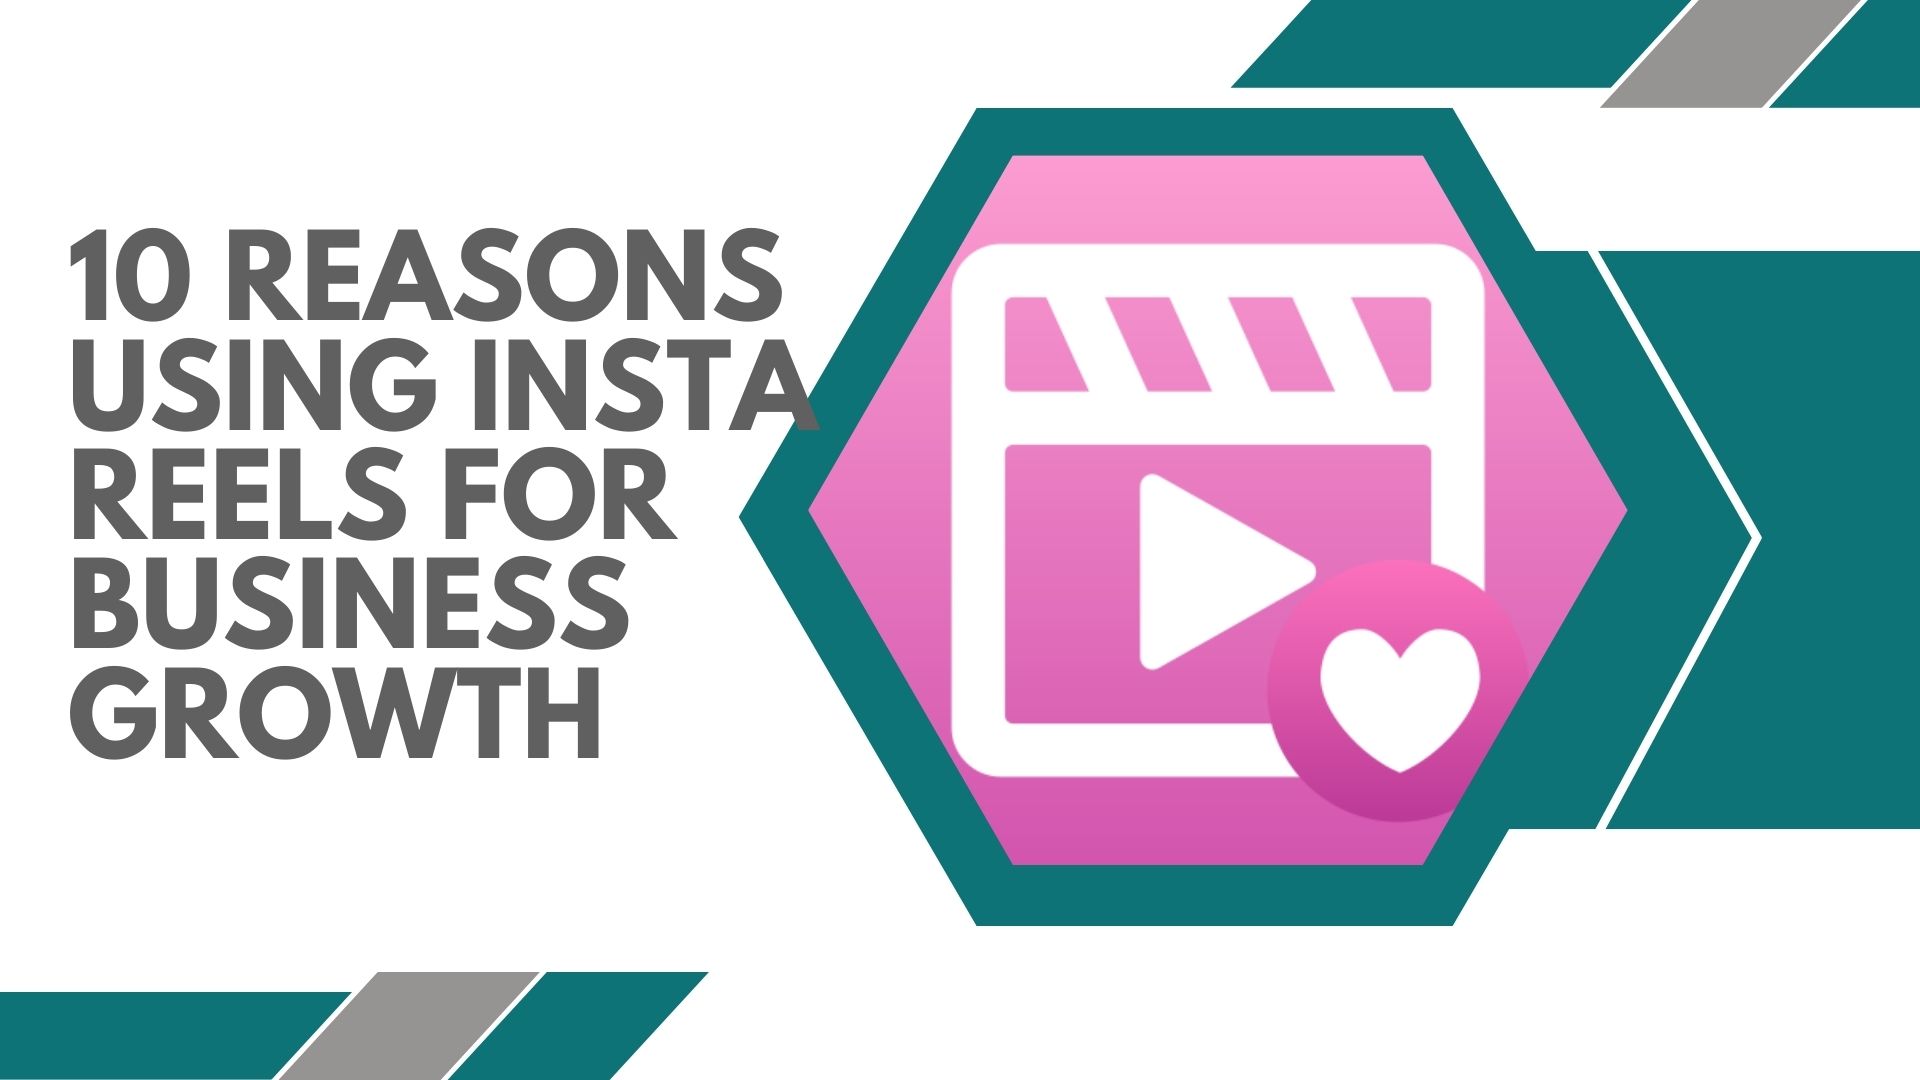 10 Reasons To Start Using Insta Reels To Grow Your Business